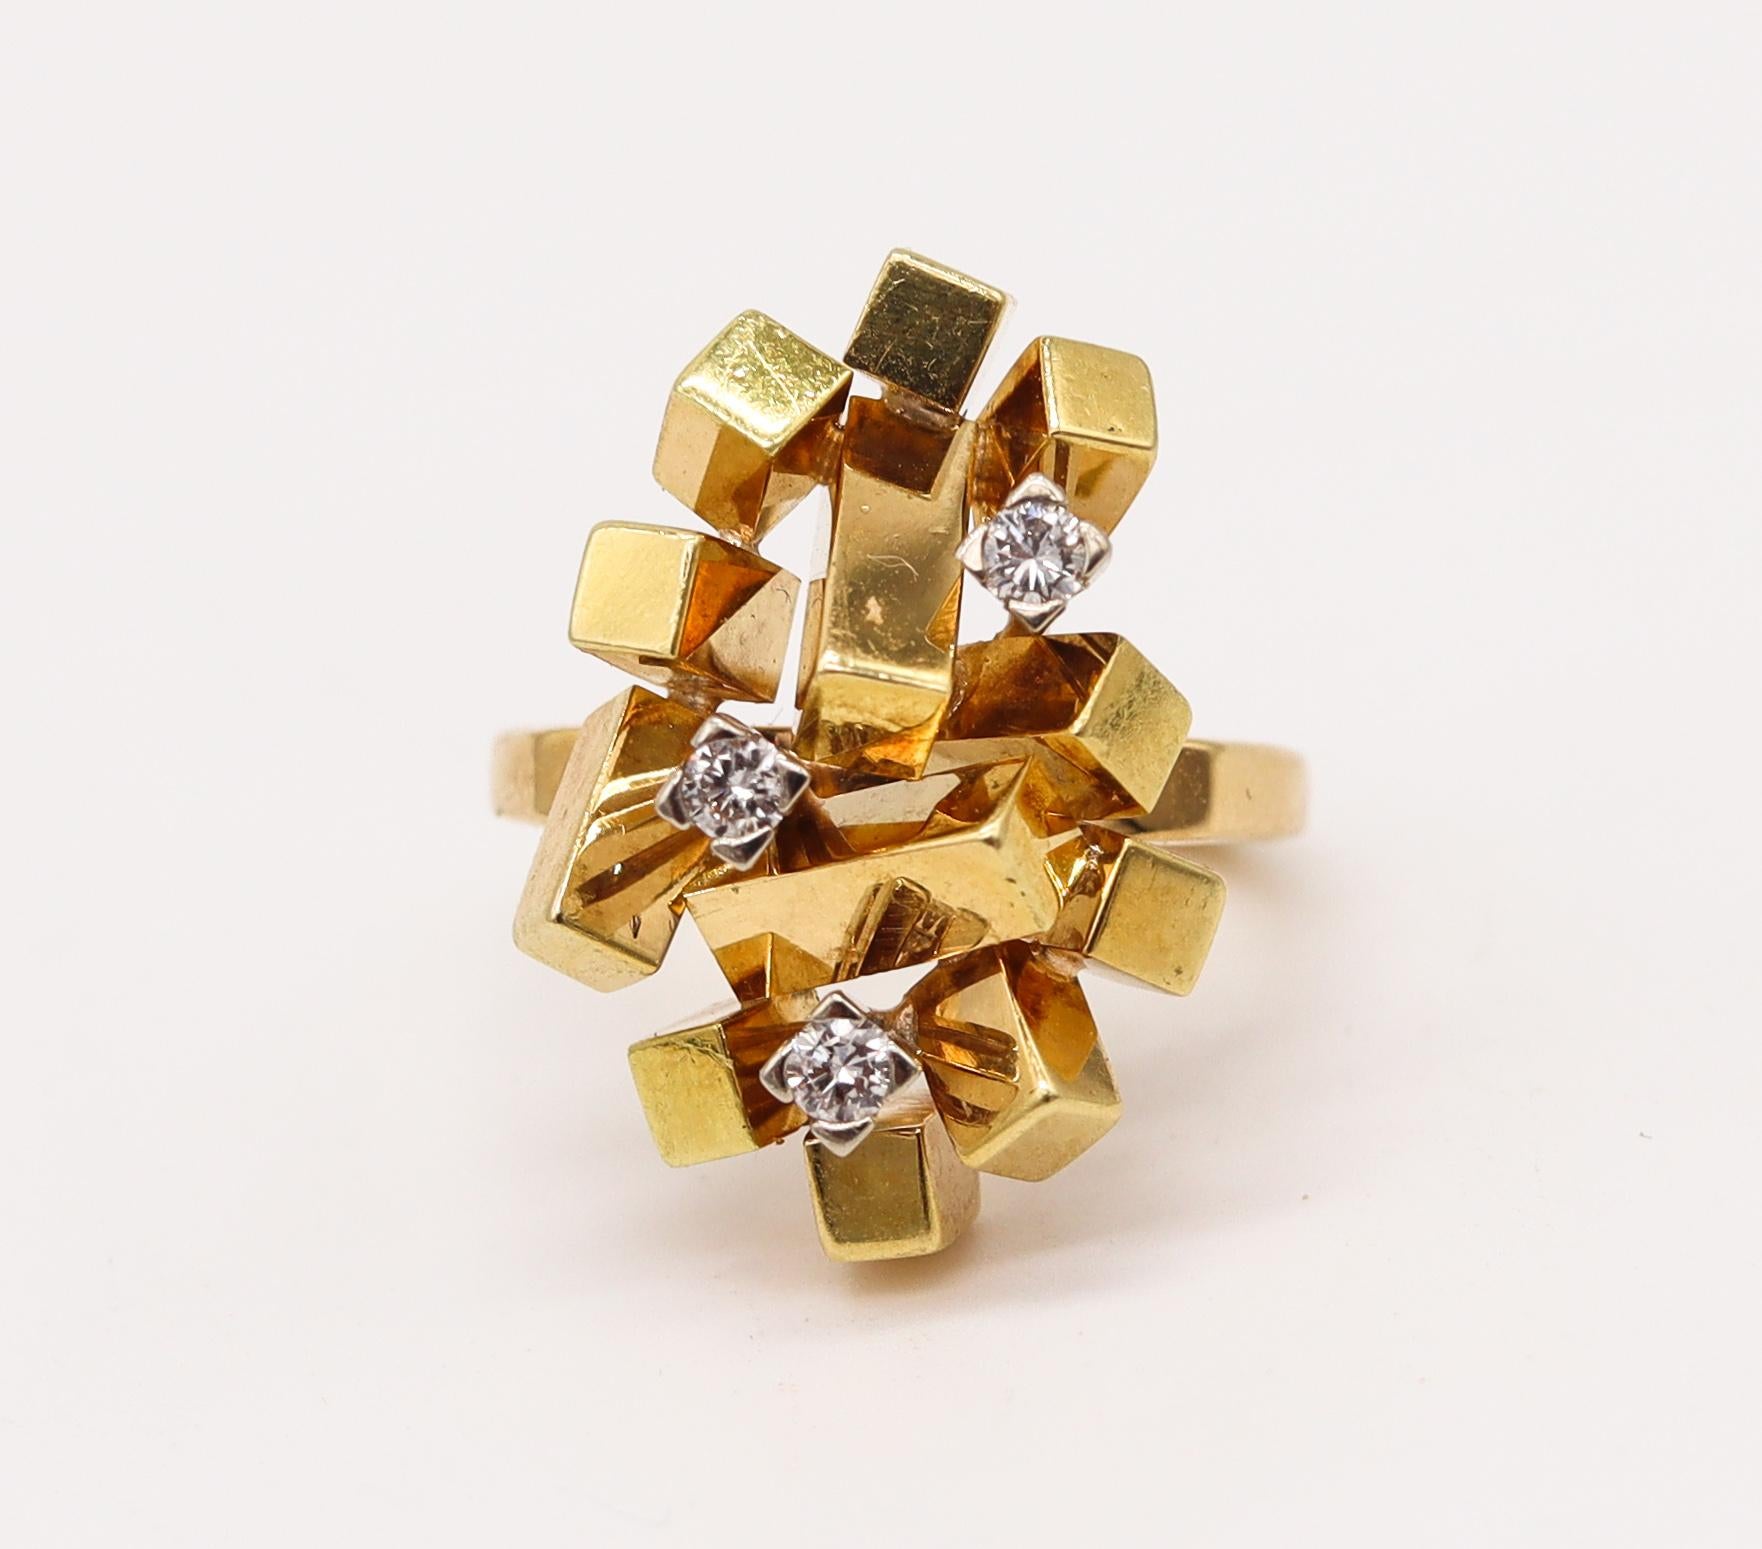 Geometric ring designed by Alfred Karram (1932-2017).

A beautiful piece of wearable brutalist art, created in New York city by the Architect and artist Alfred Karram, back in the early 1970's. This geometric sculptural ring has been individually